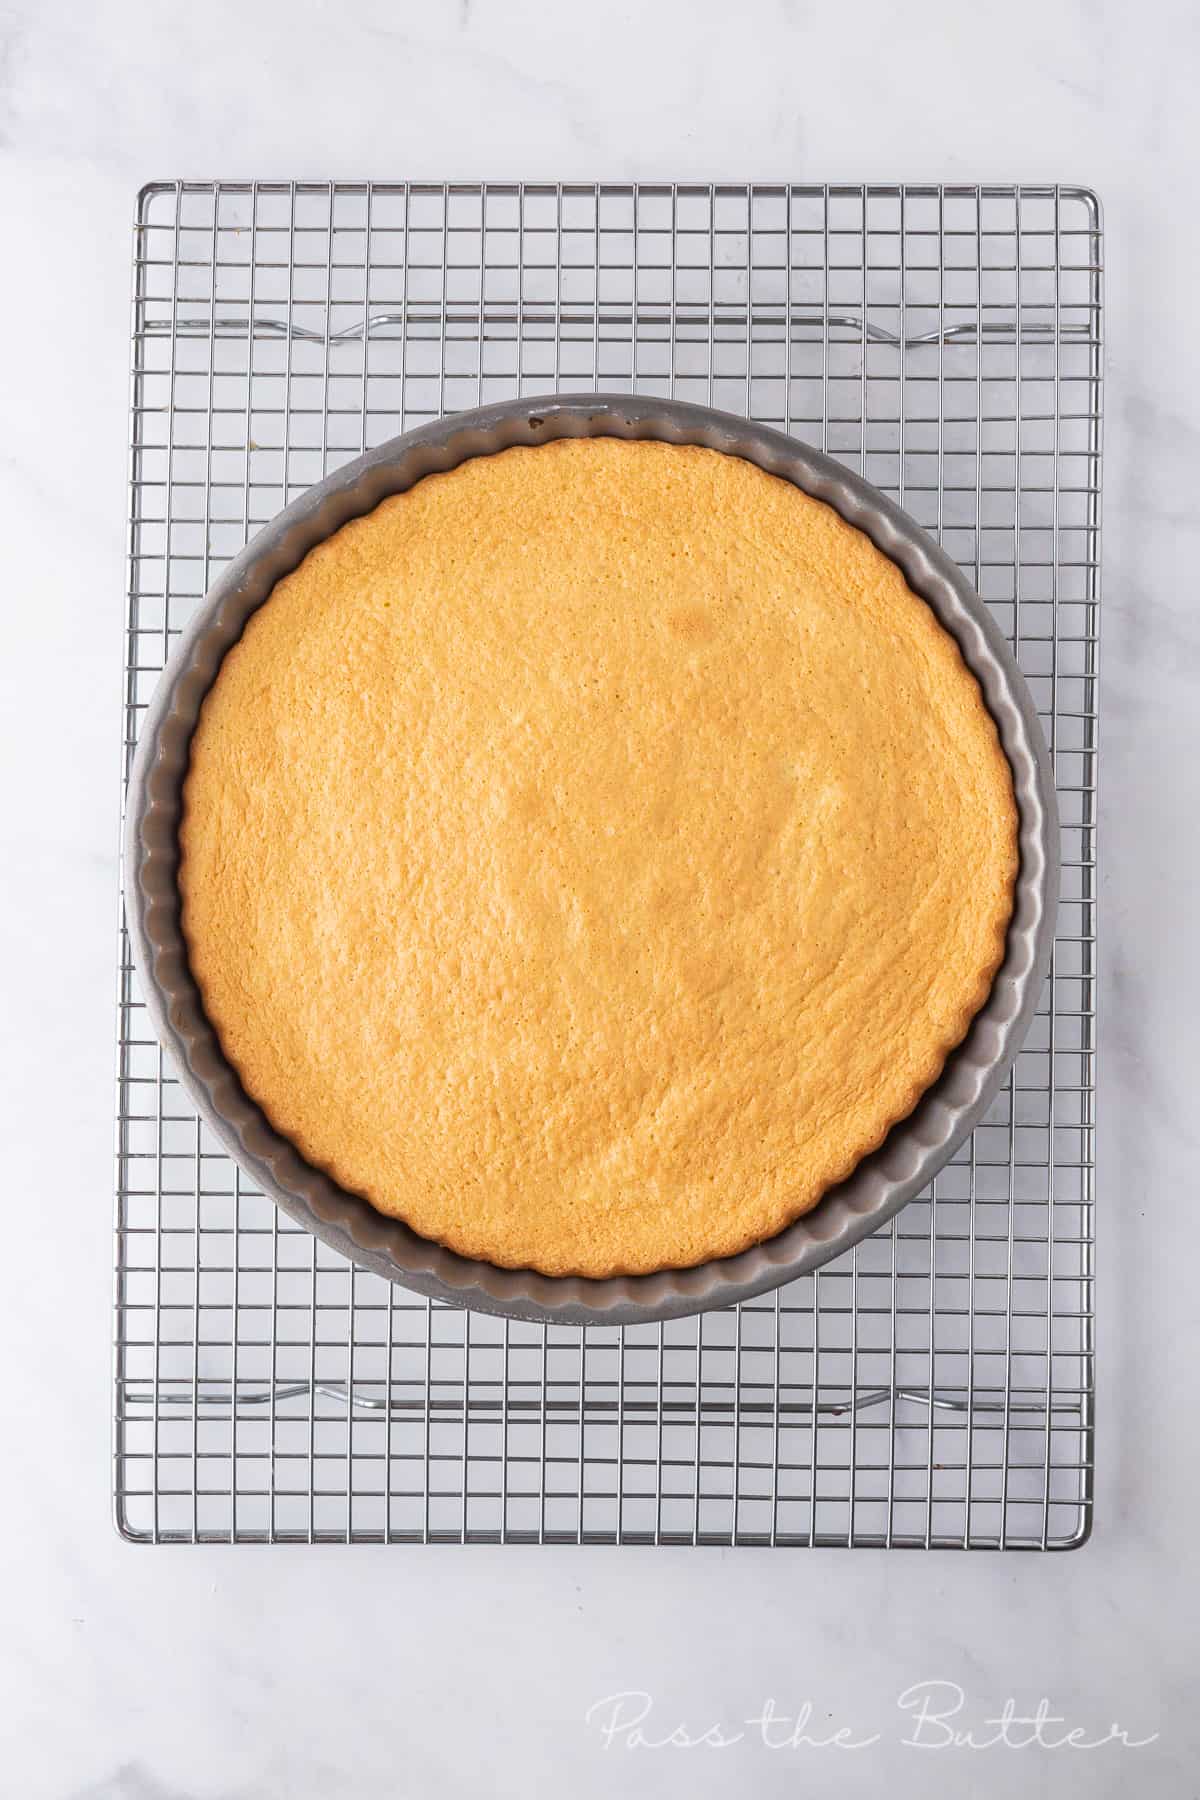 allow the baked flan to cool on a wire rack